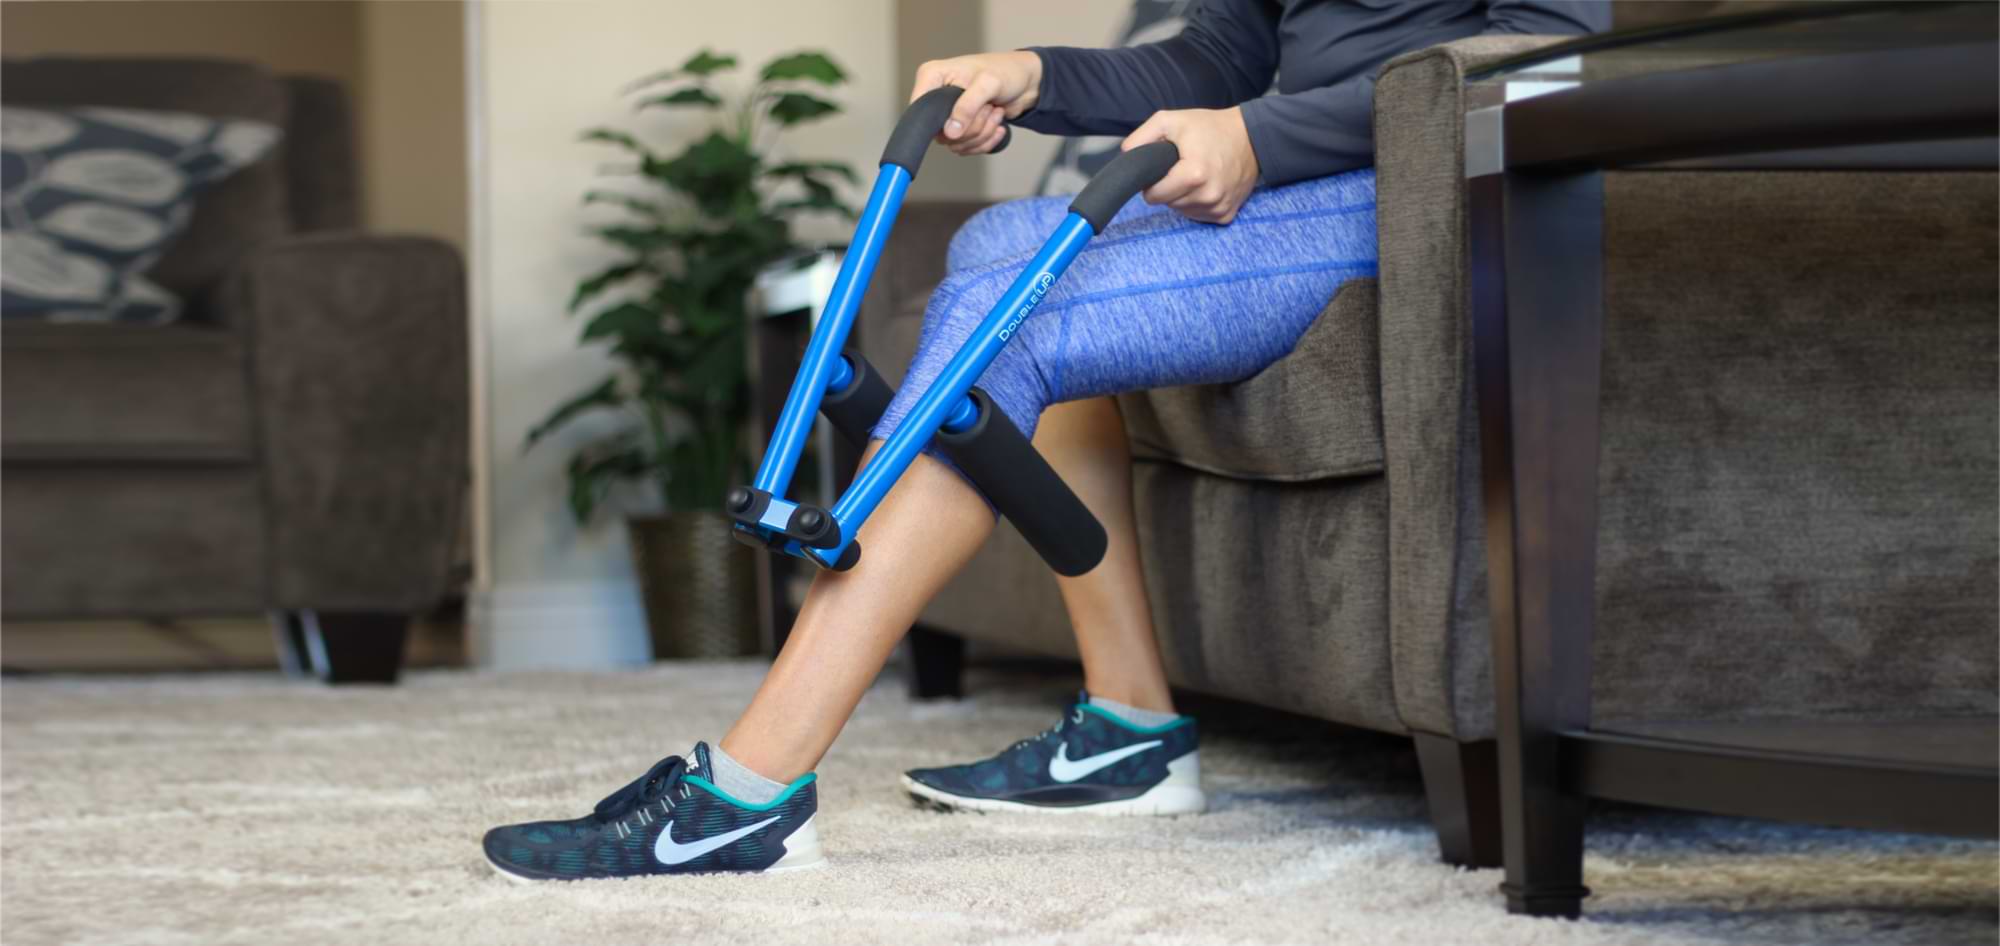 DoubleUP Roller used on calf while seated on a sofa